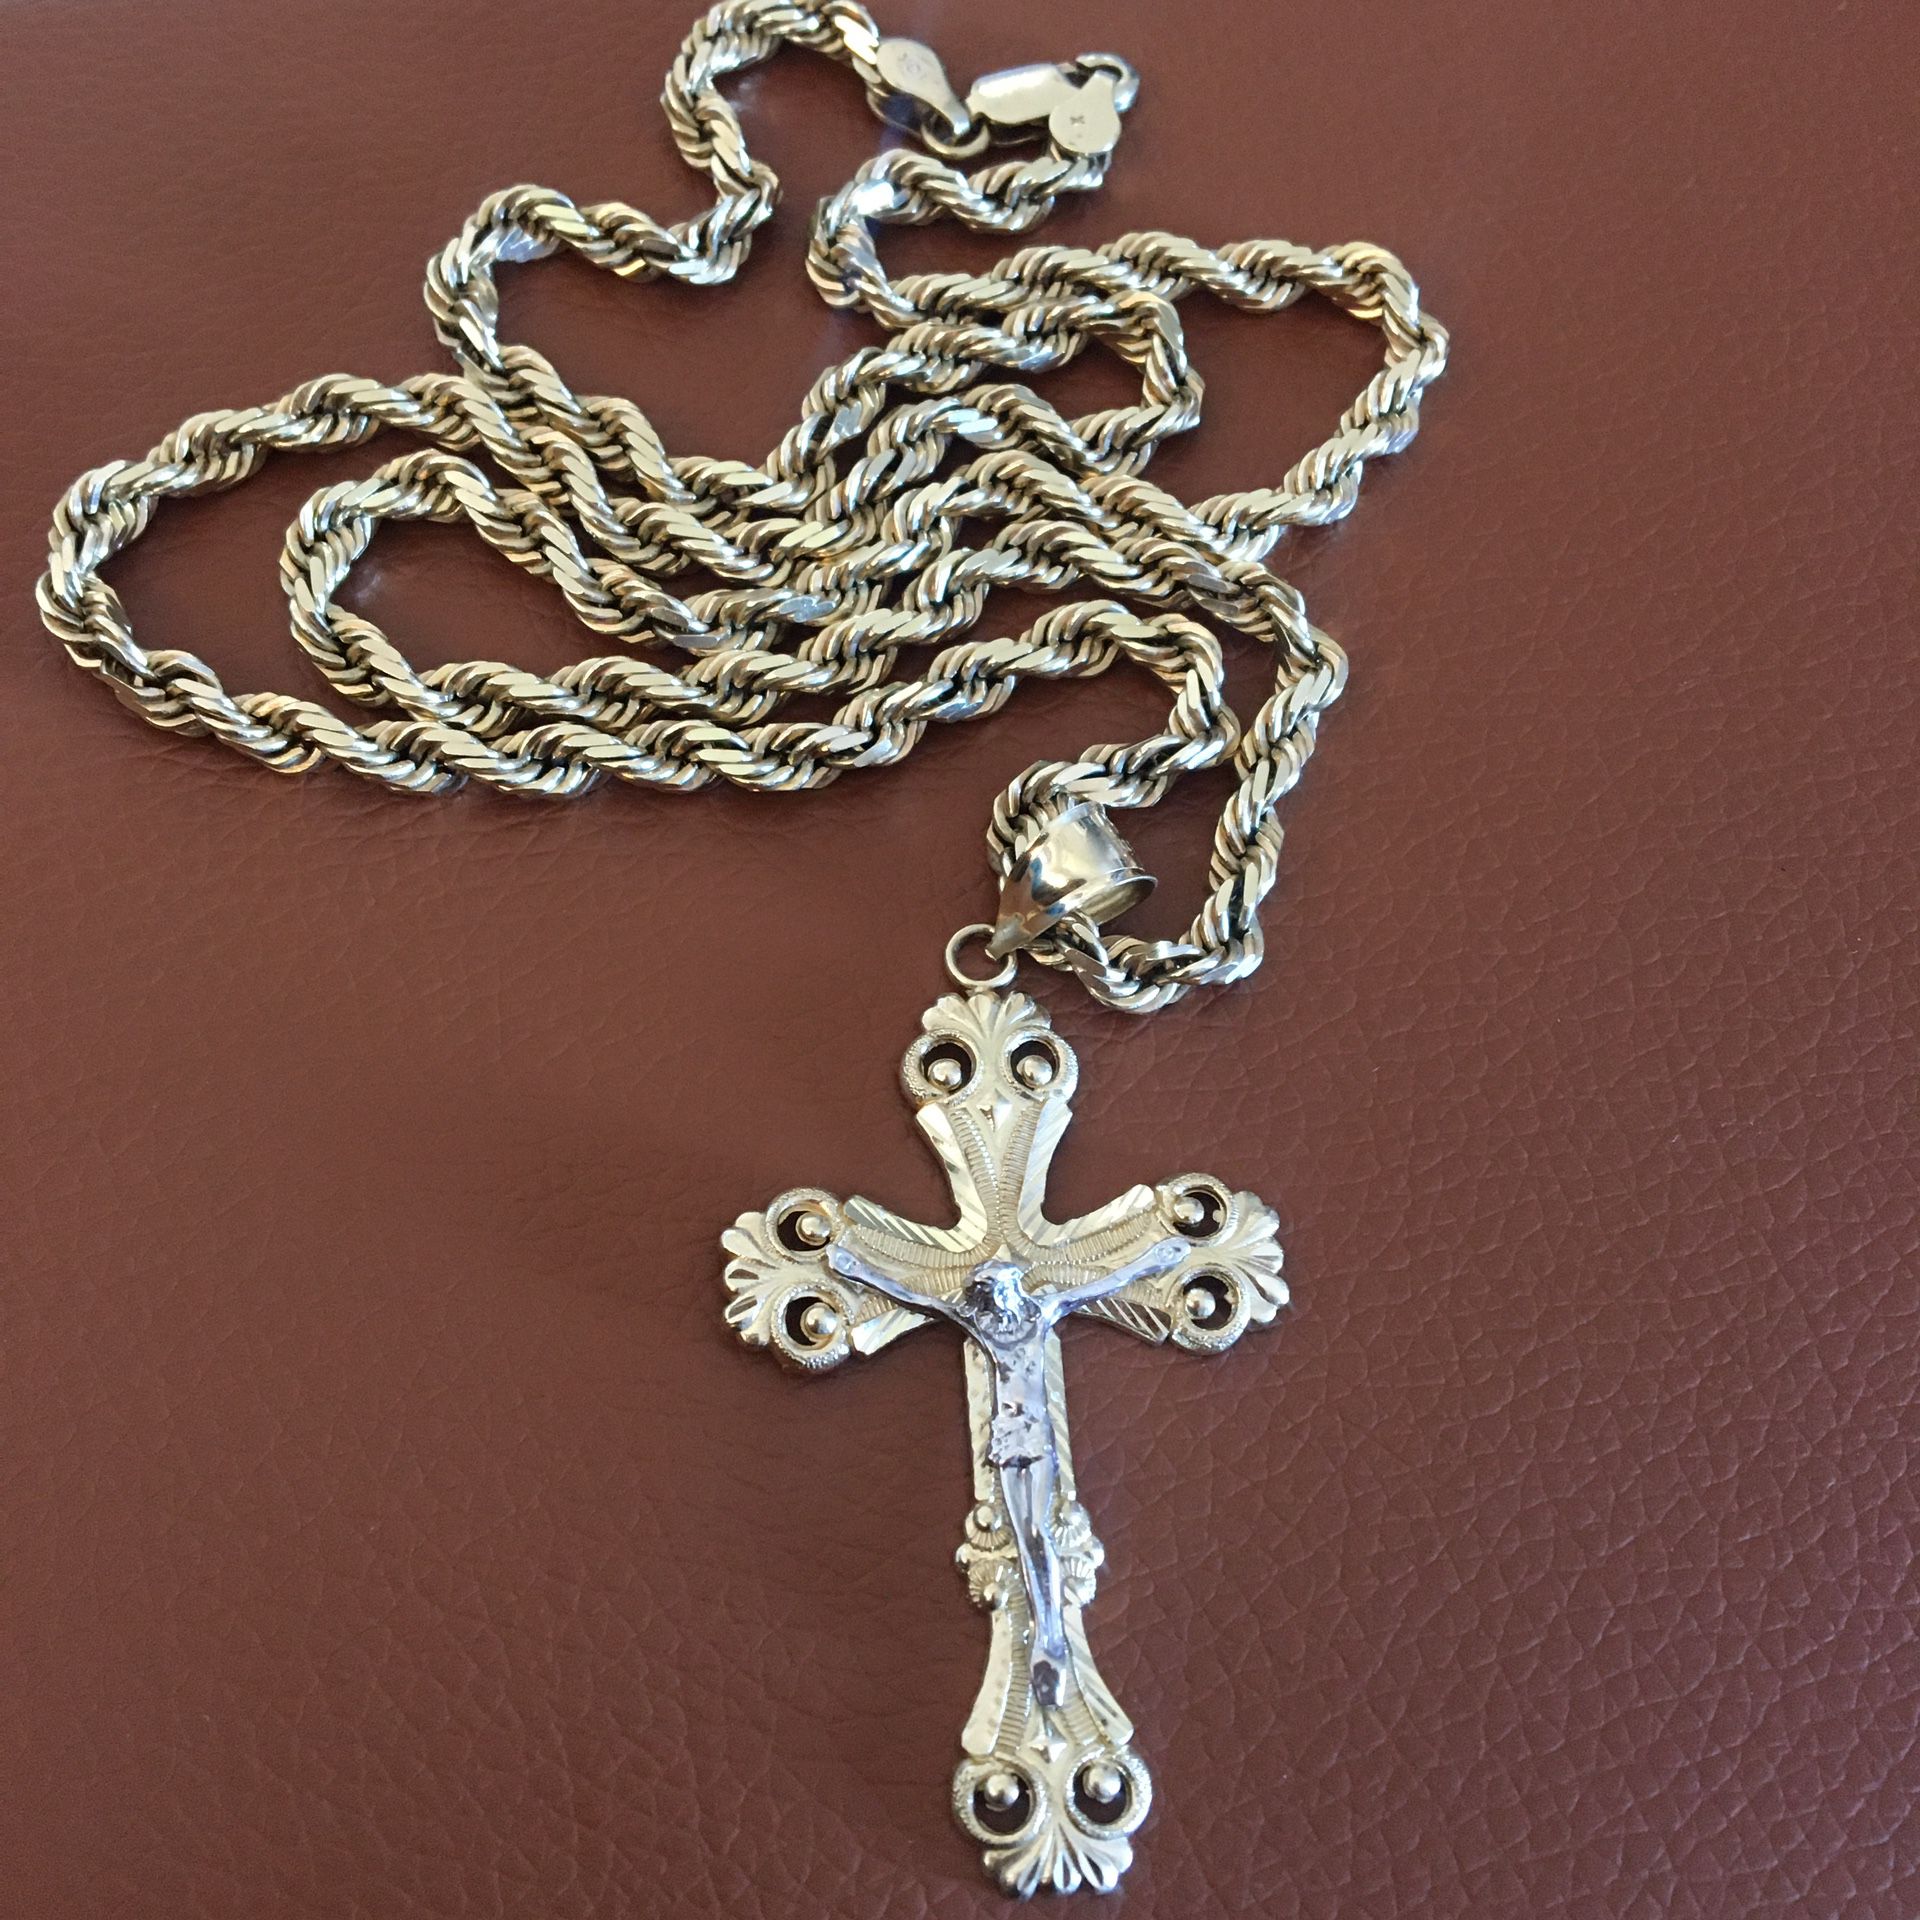 Real Gold 14k cross pendant 10k 5mm rope chain 24”inches ( shiny diamond cuts chain ) Solid heavy